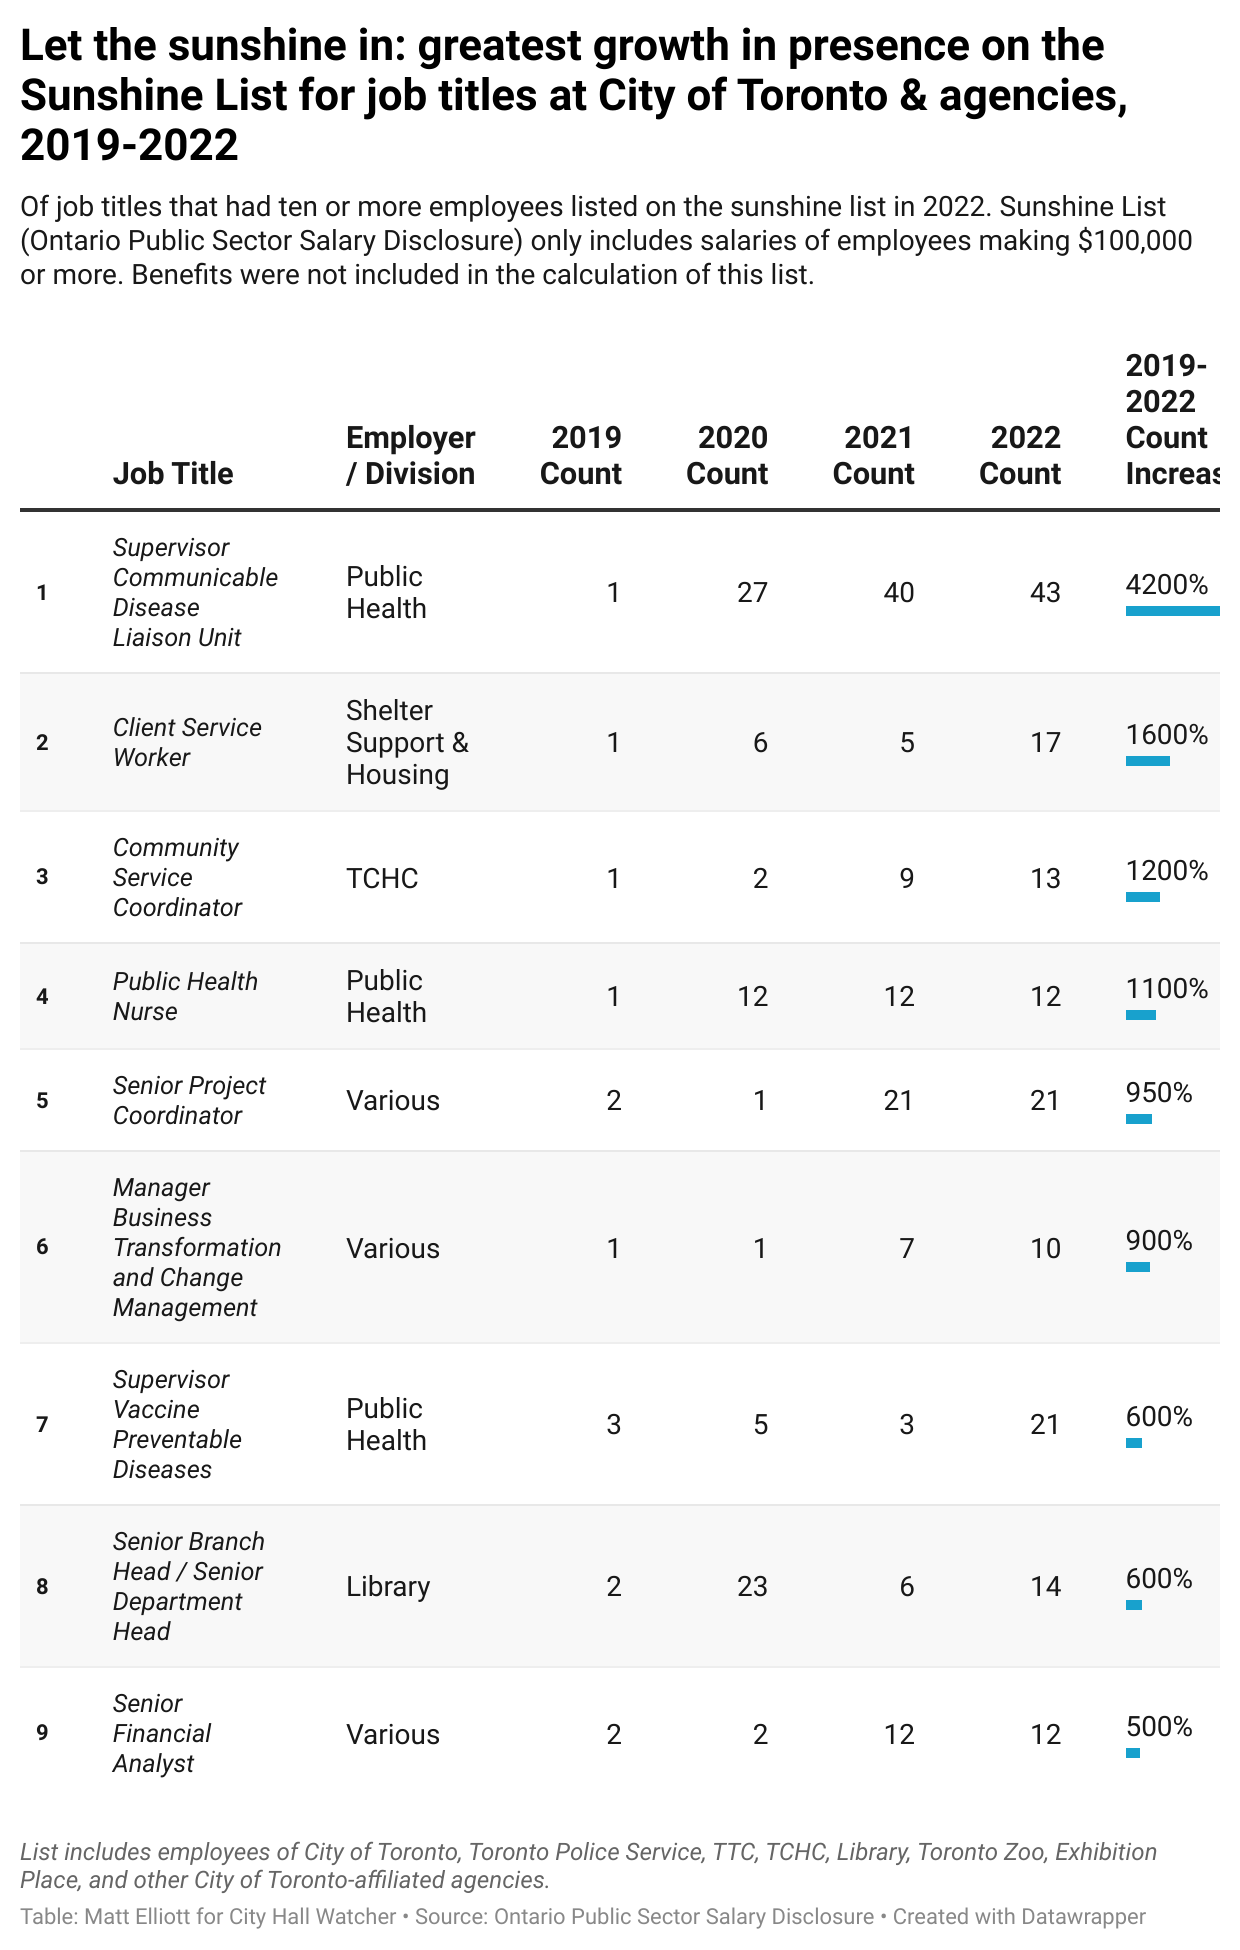 Data table showing increases in the number of jobs per job title on the Sunshine List, 2019-2022